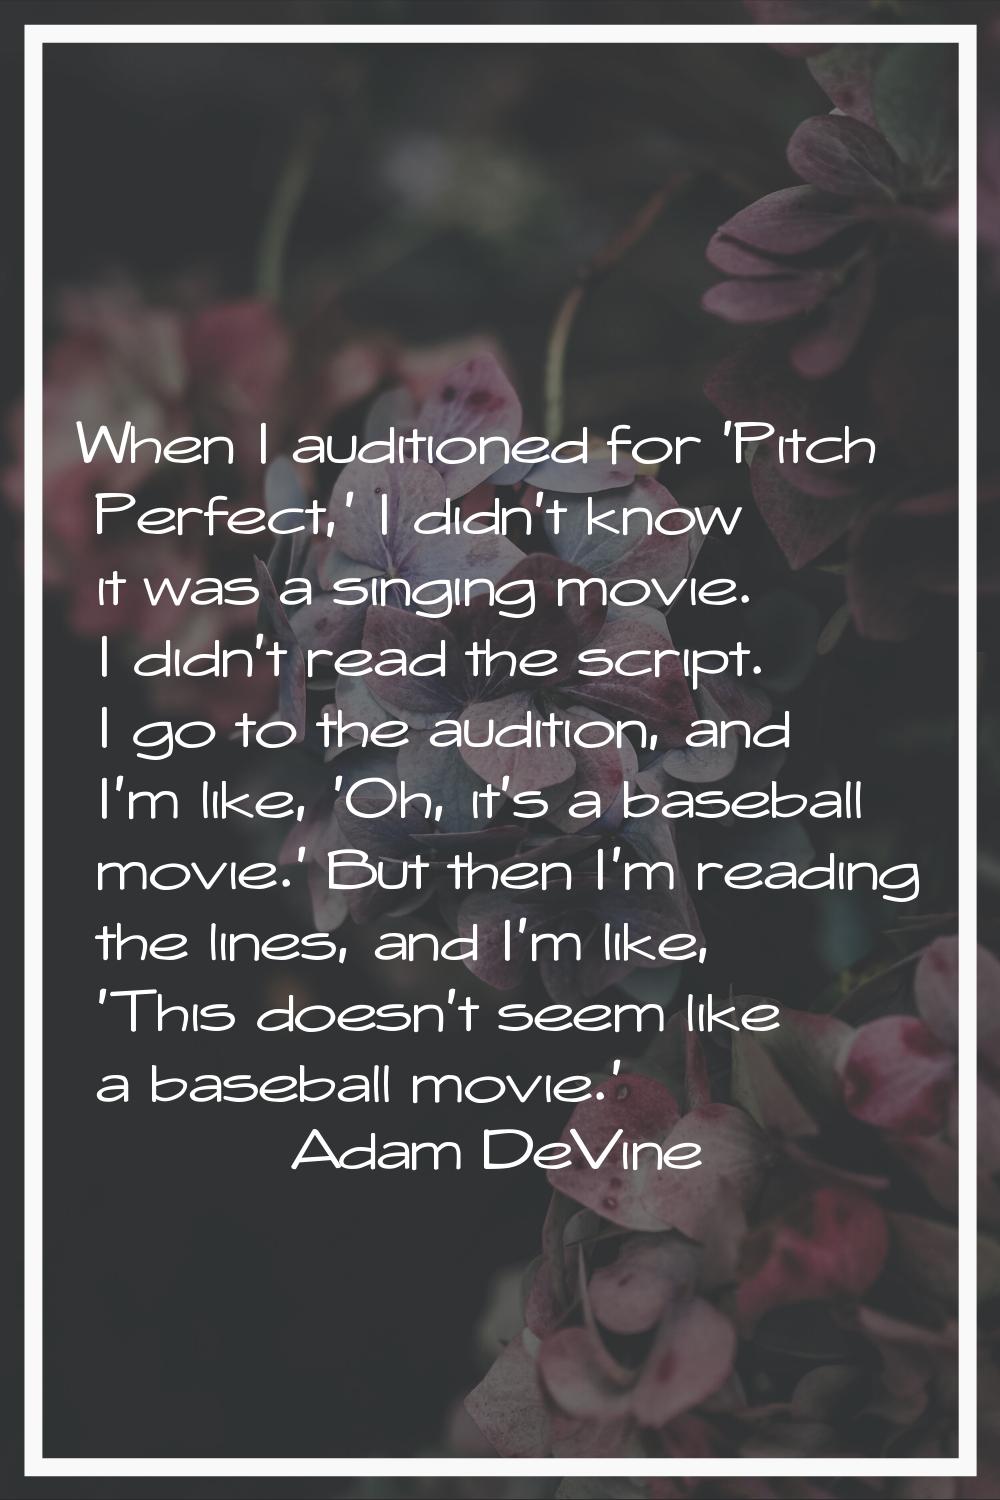 When I auditioned for 'Pitch Perfect,' I didn't know it was a singing movie. I didn't read the scri